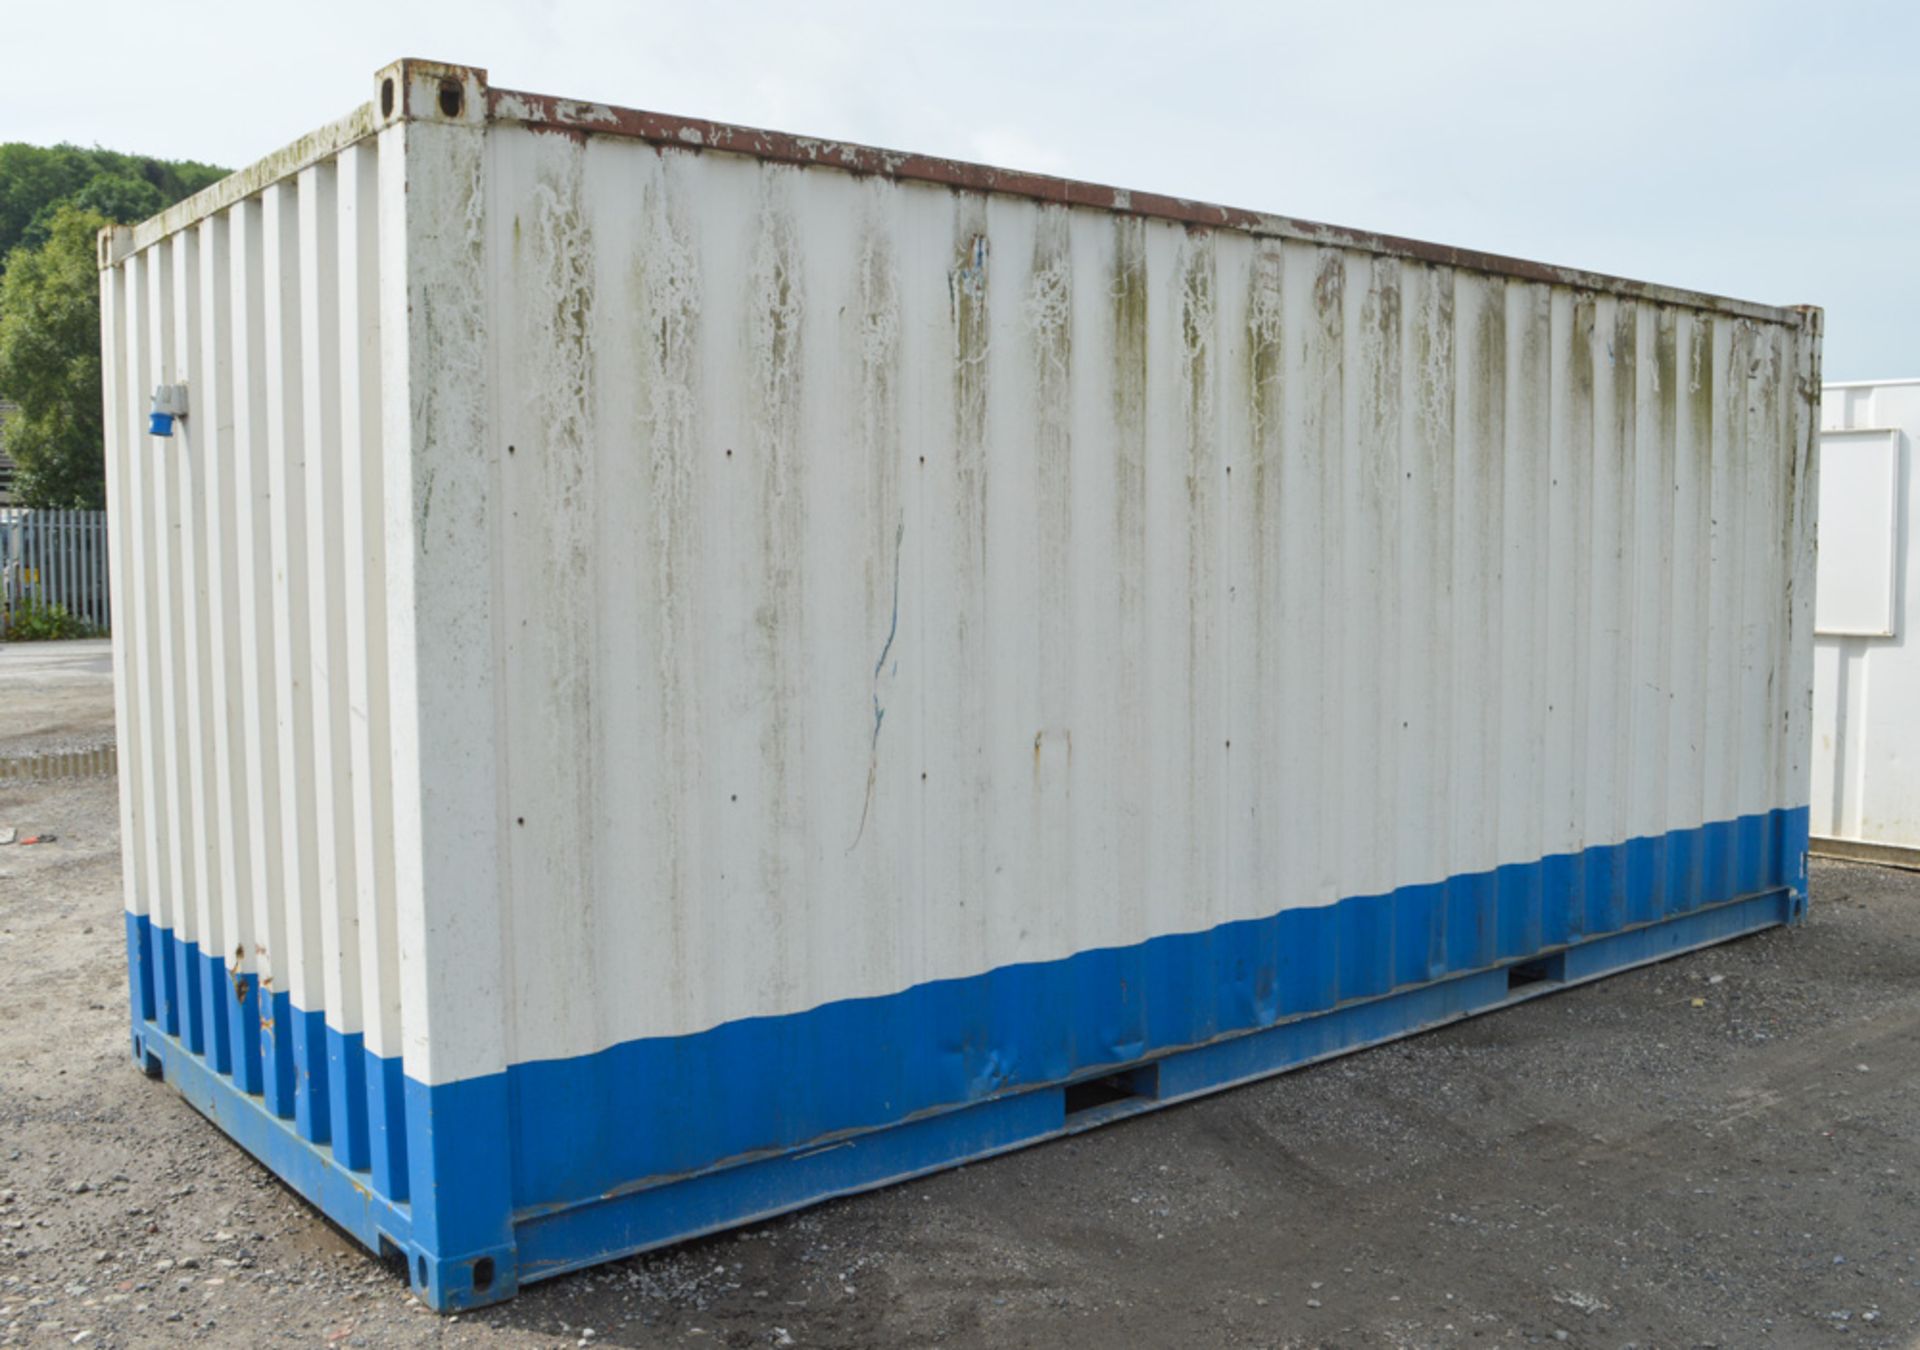 20 ft x 8 ft steel shipping container BB2261 - Image 3 of 5